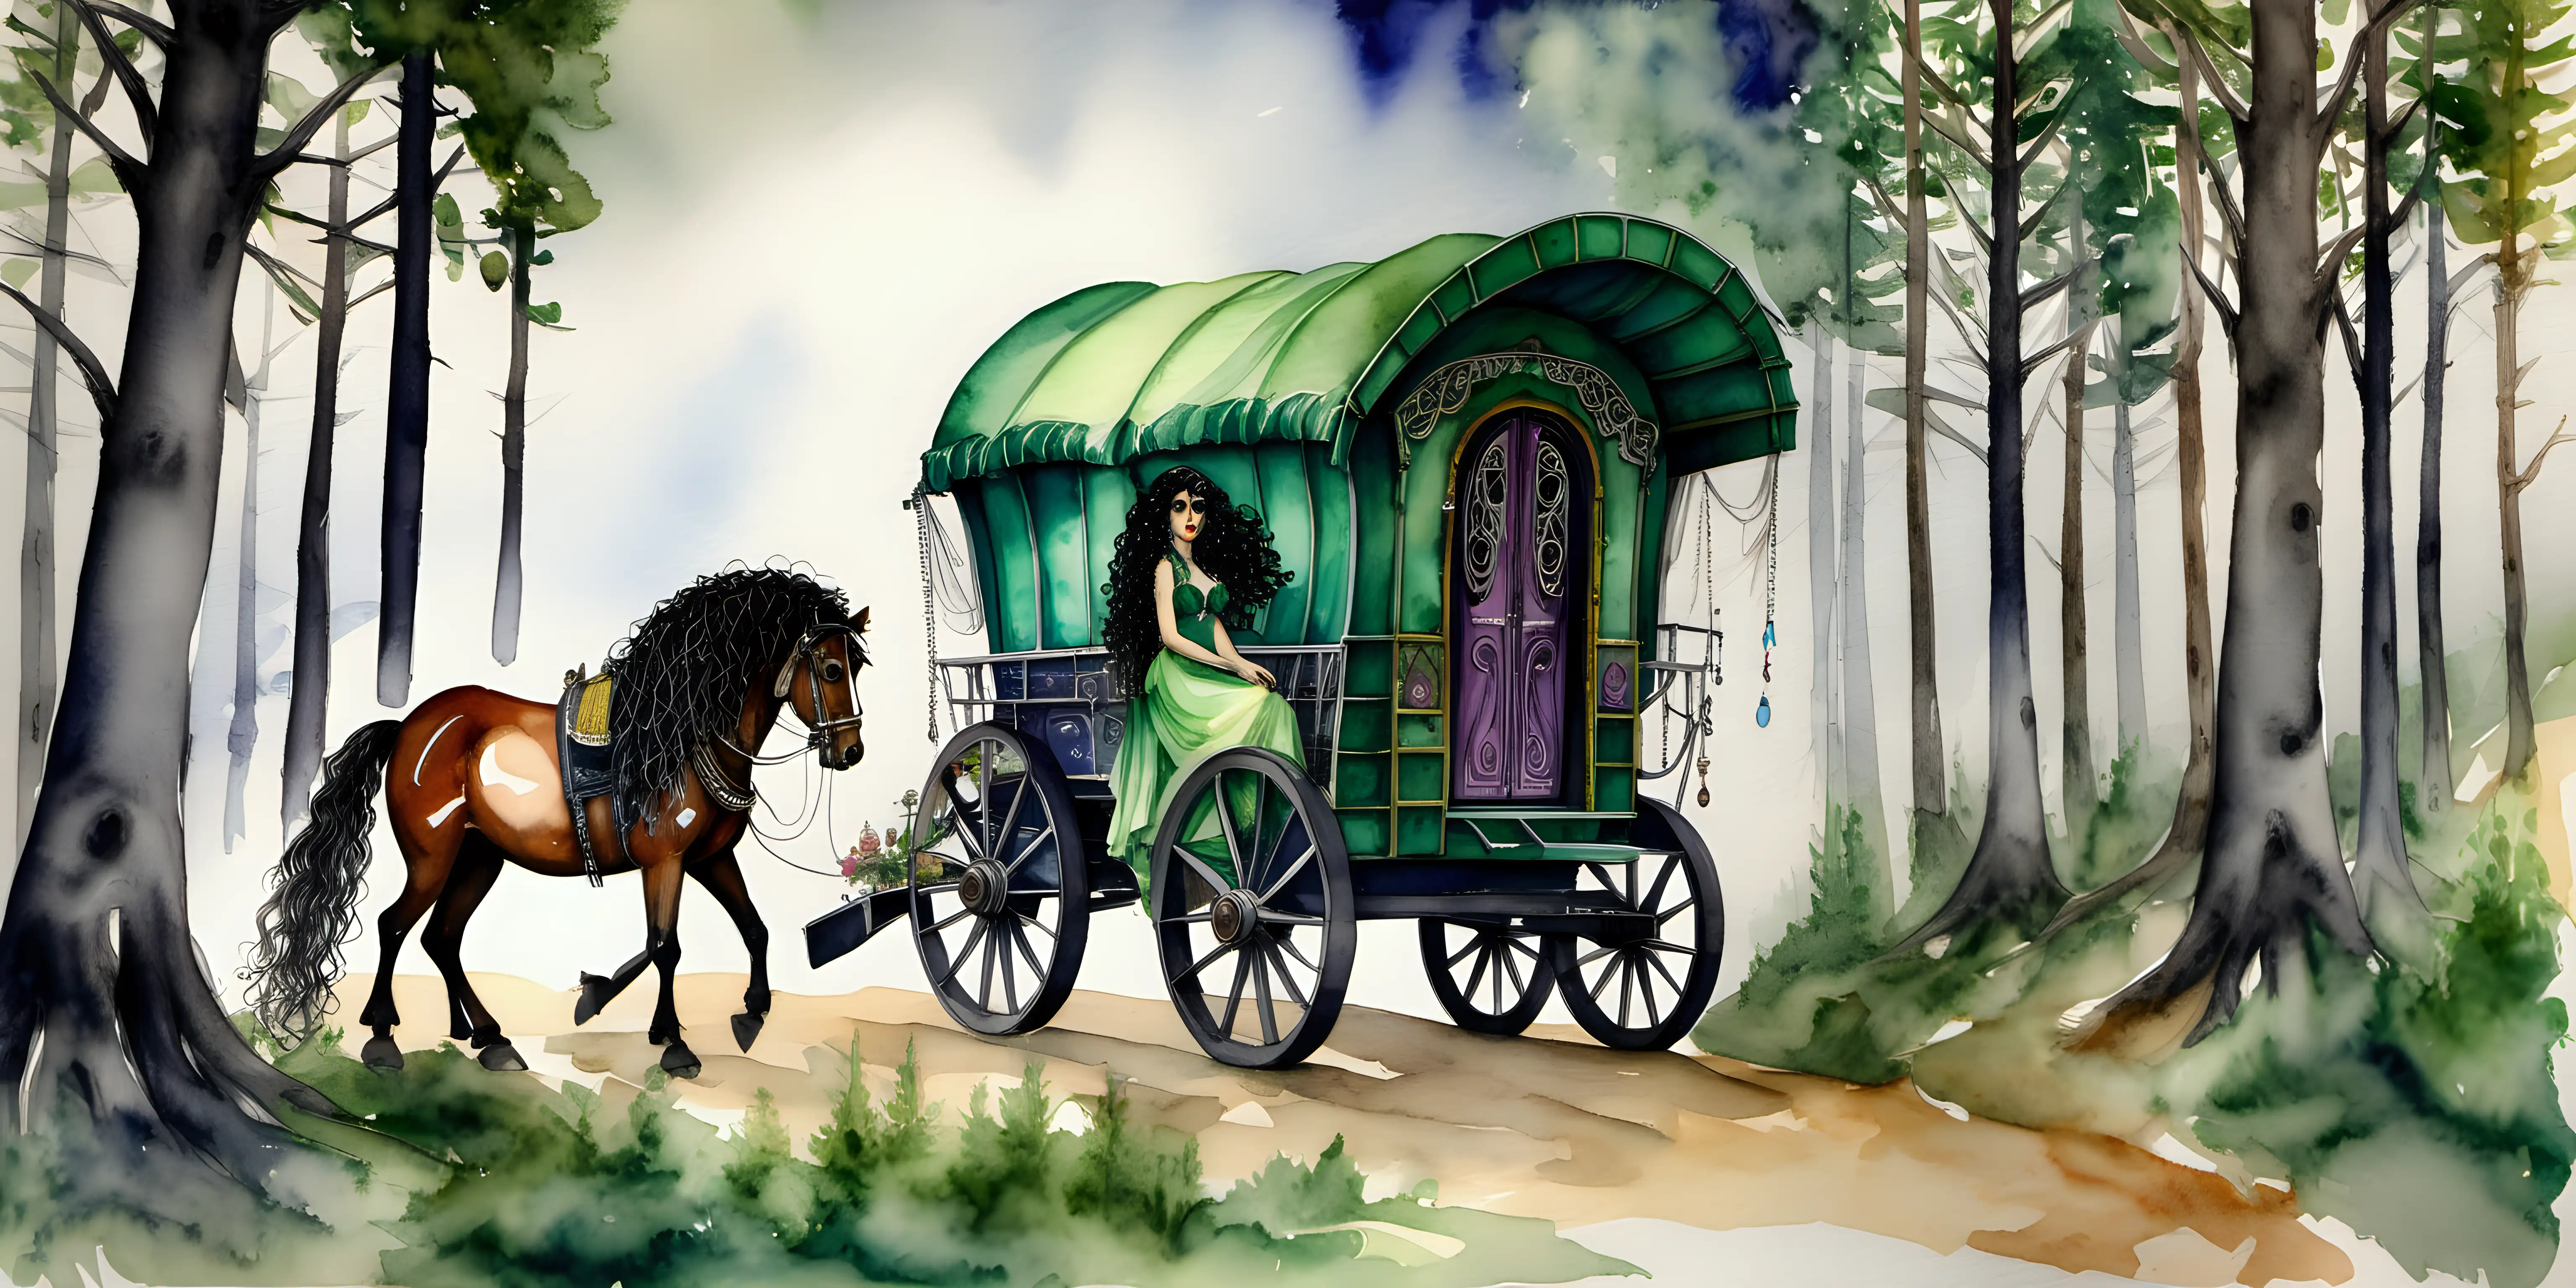 Enchanting Watercolor Gypsy Wagon Scene in Pine Forest with Horses and Woman